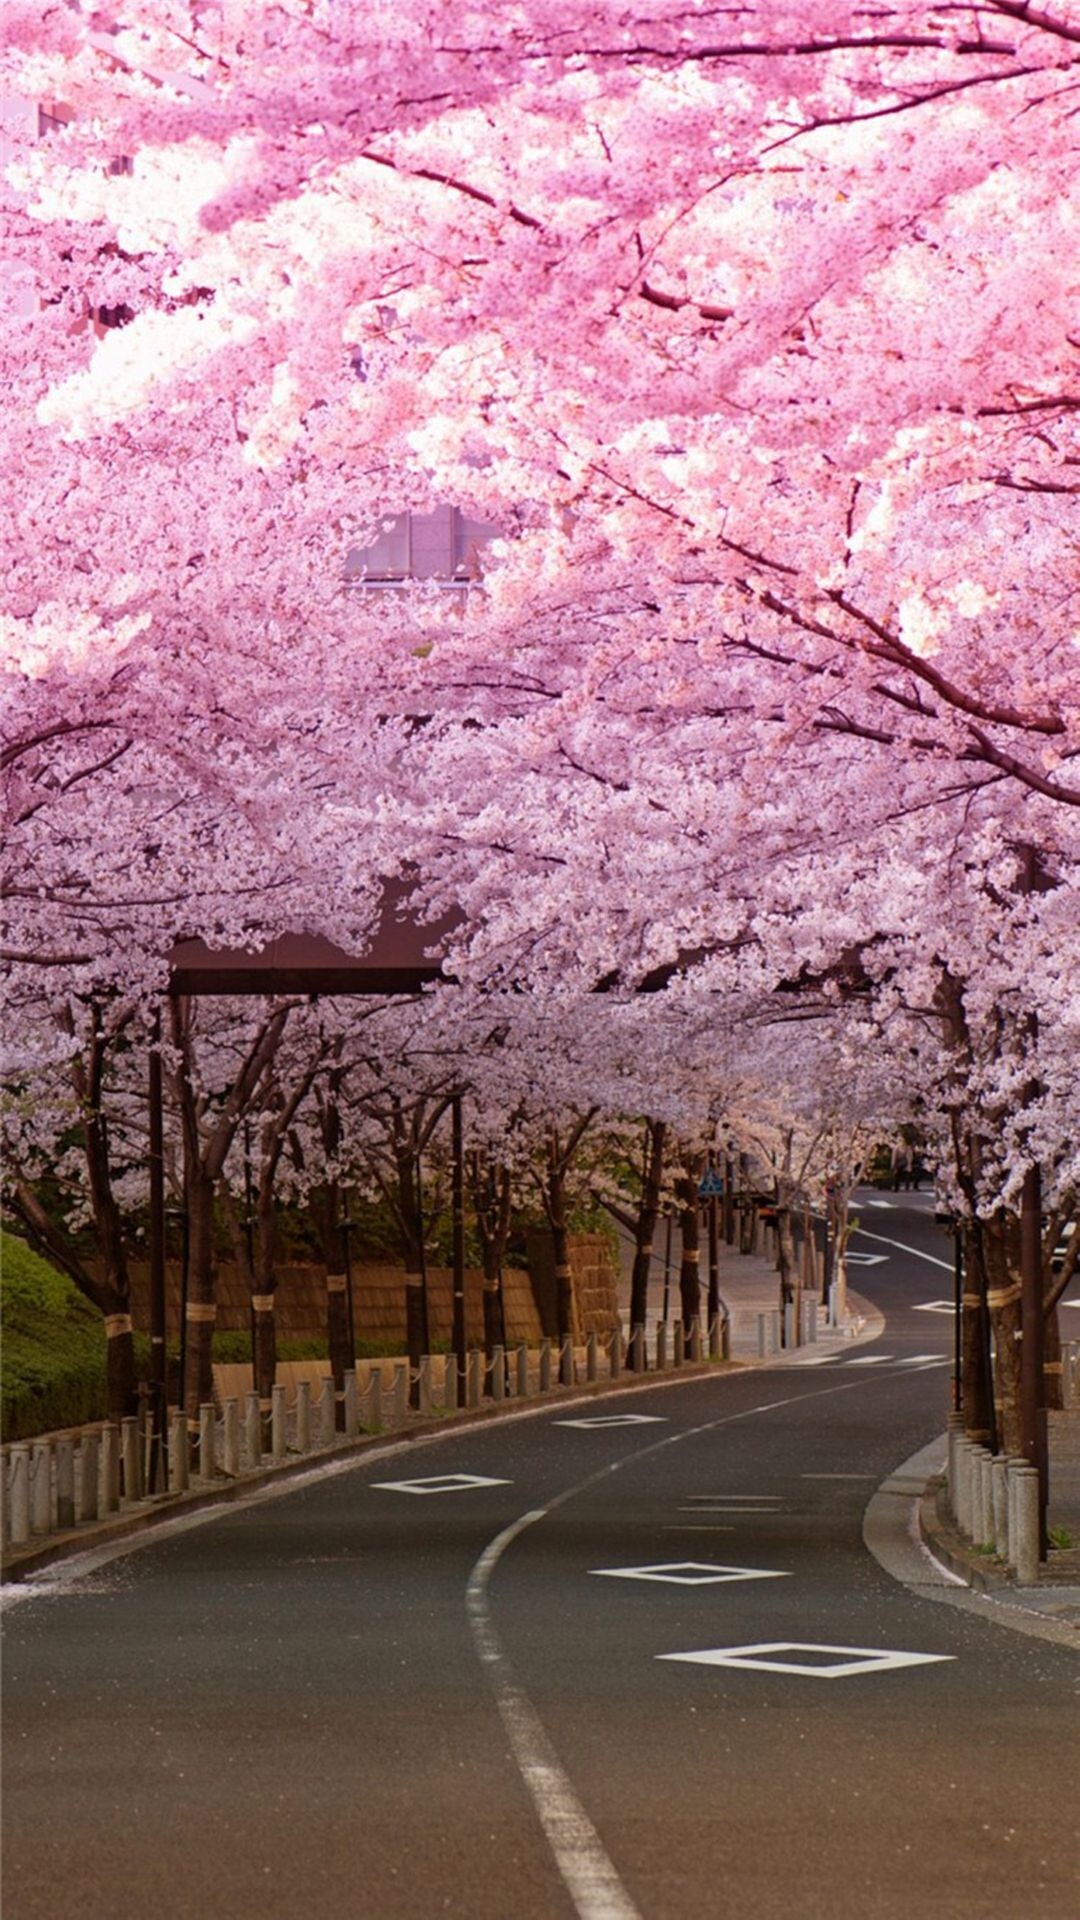 Wallpaper Japan Cherry Blossoms (71+ images)